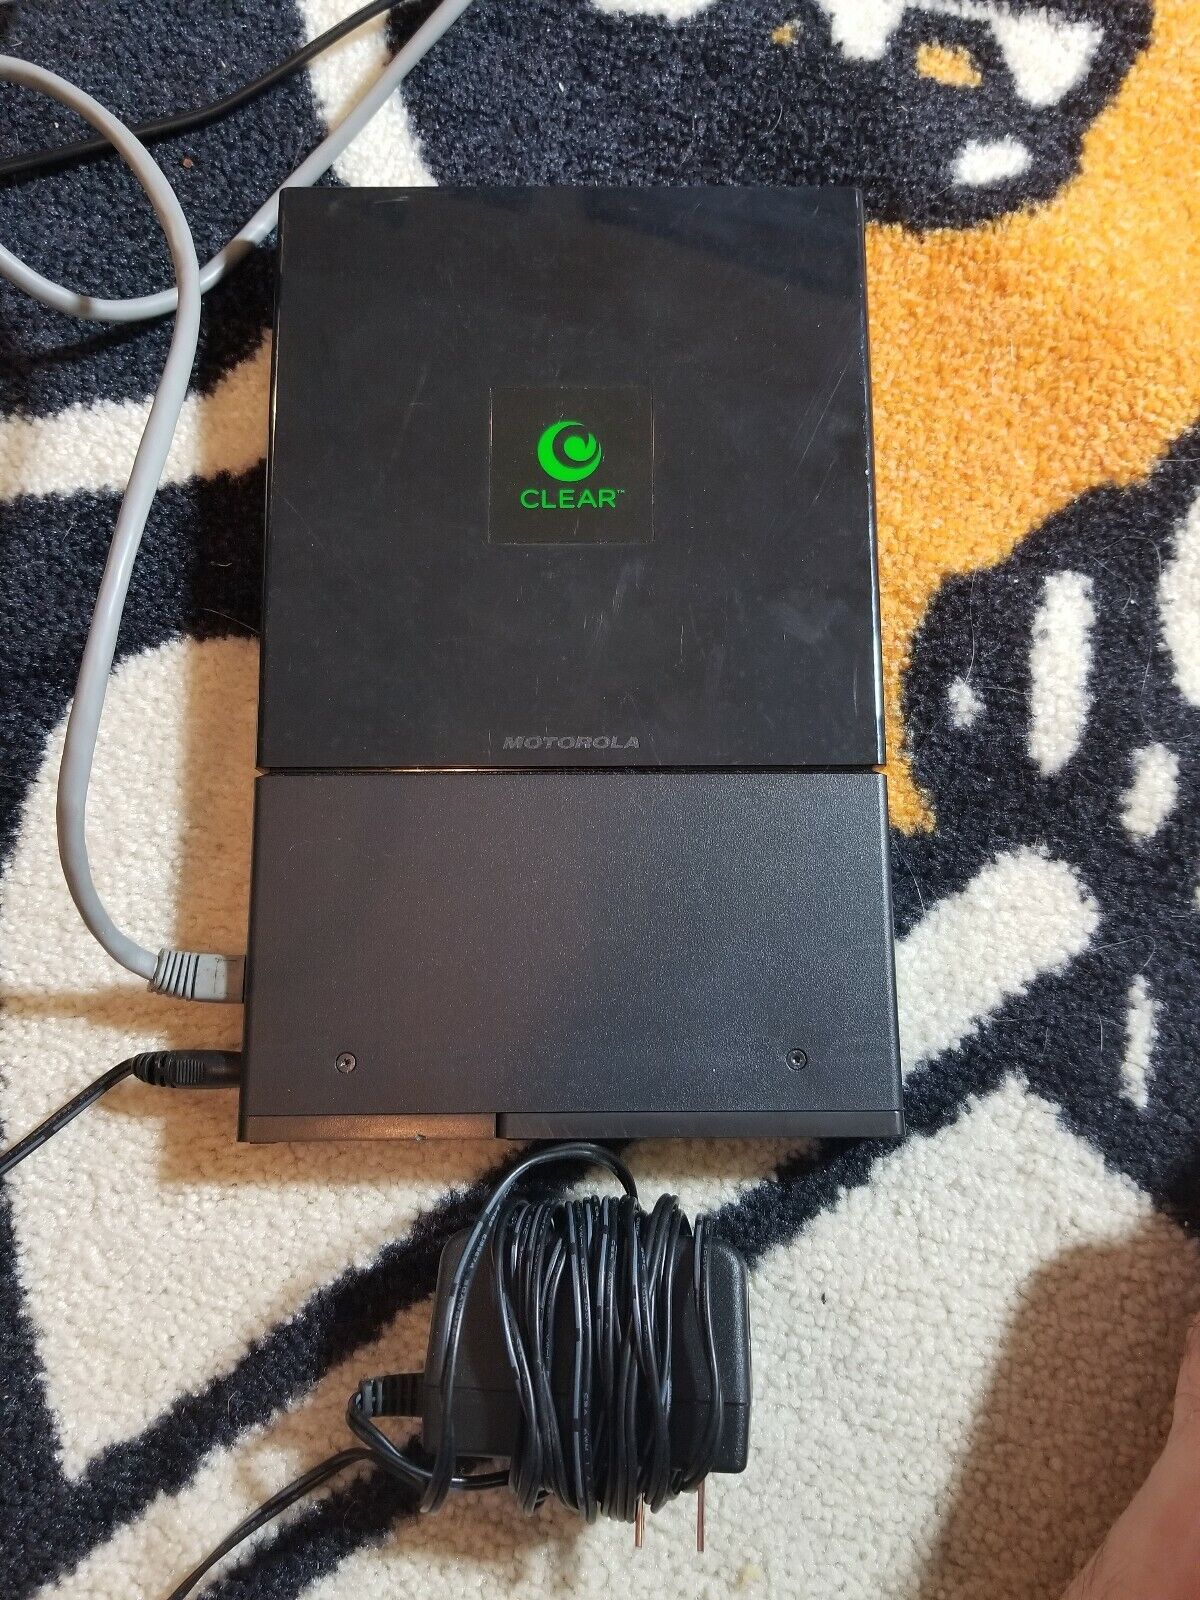 Motorola Clear Router CPEi 25725.  Used but works  Comes w Power Cord and Cable